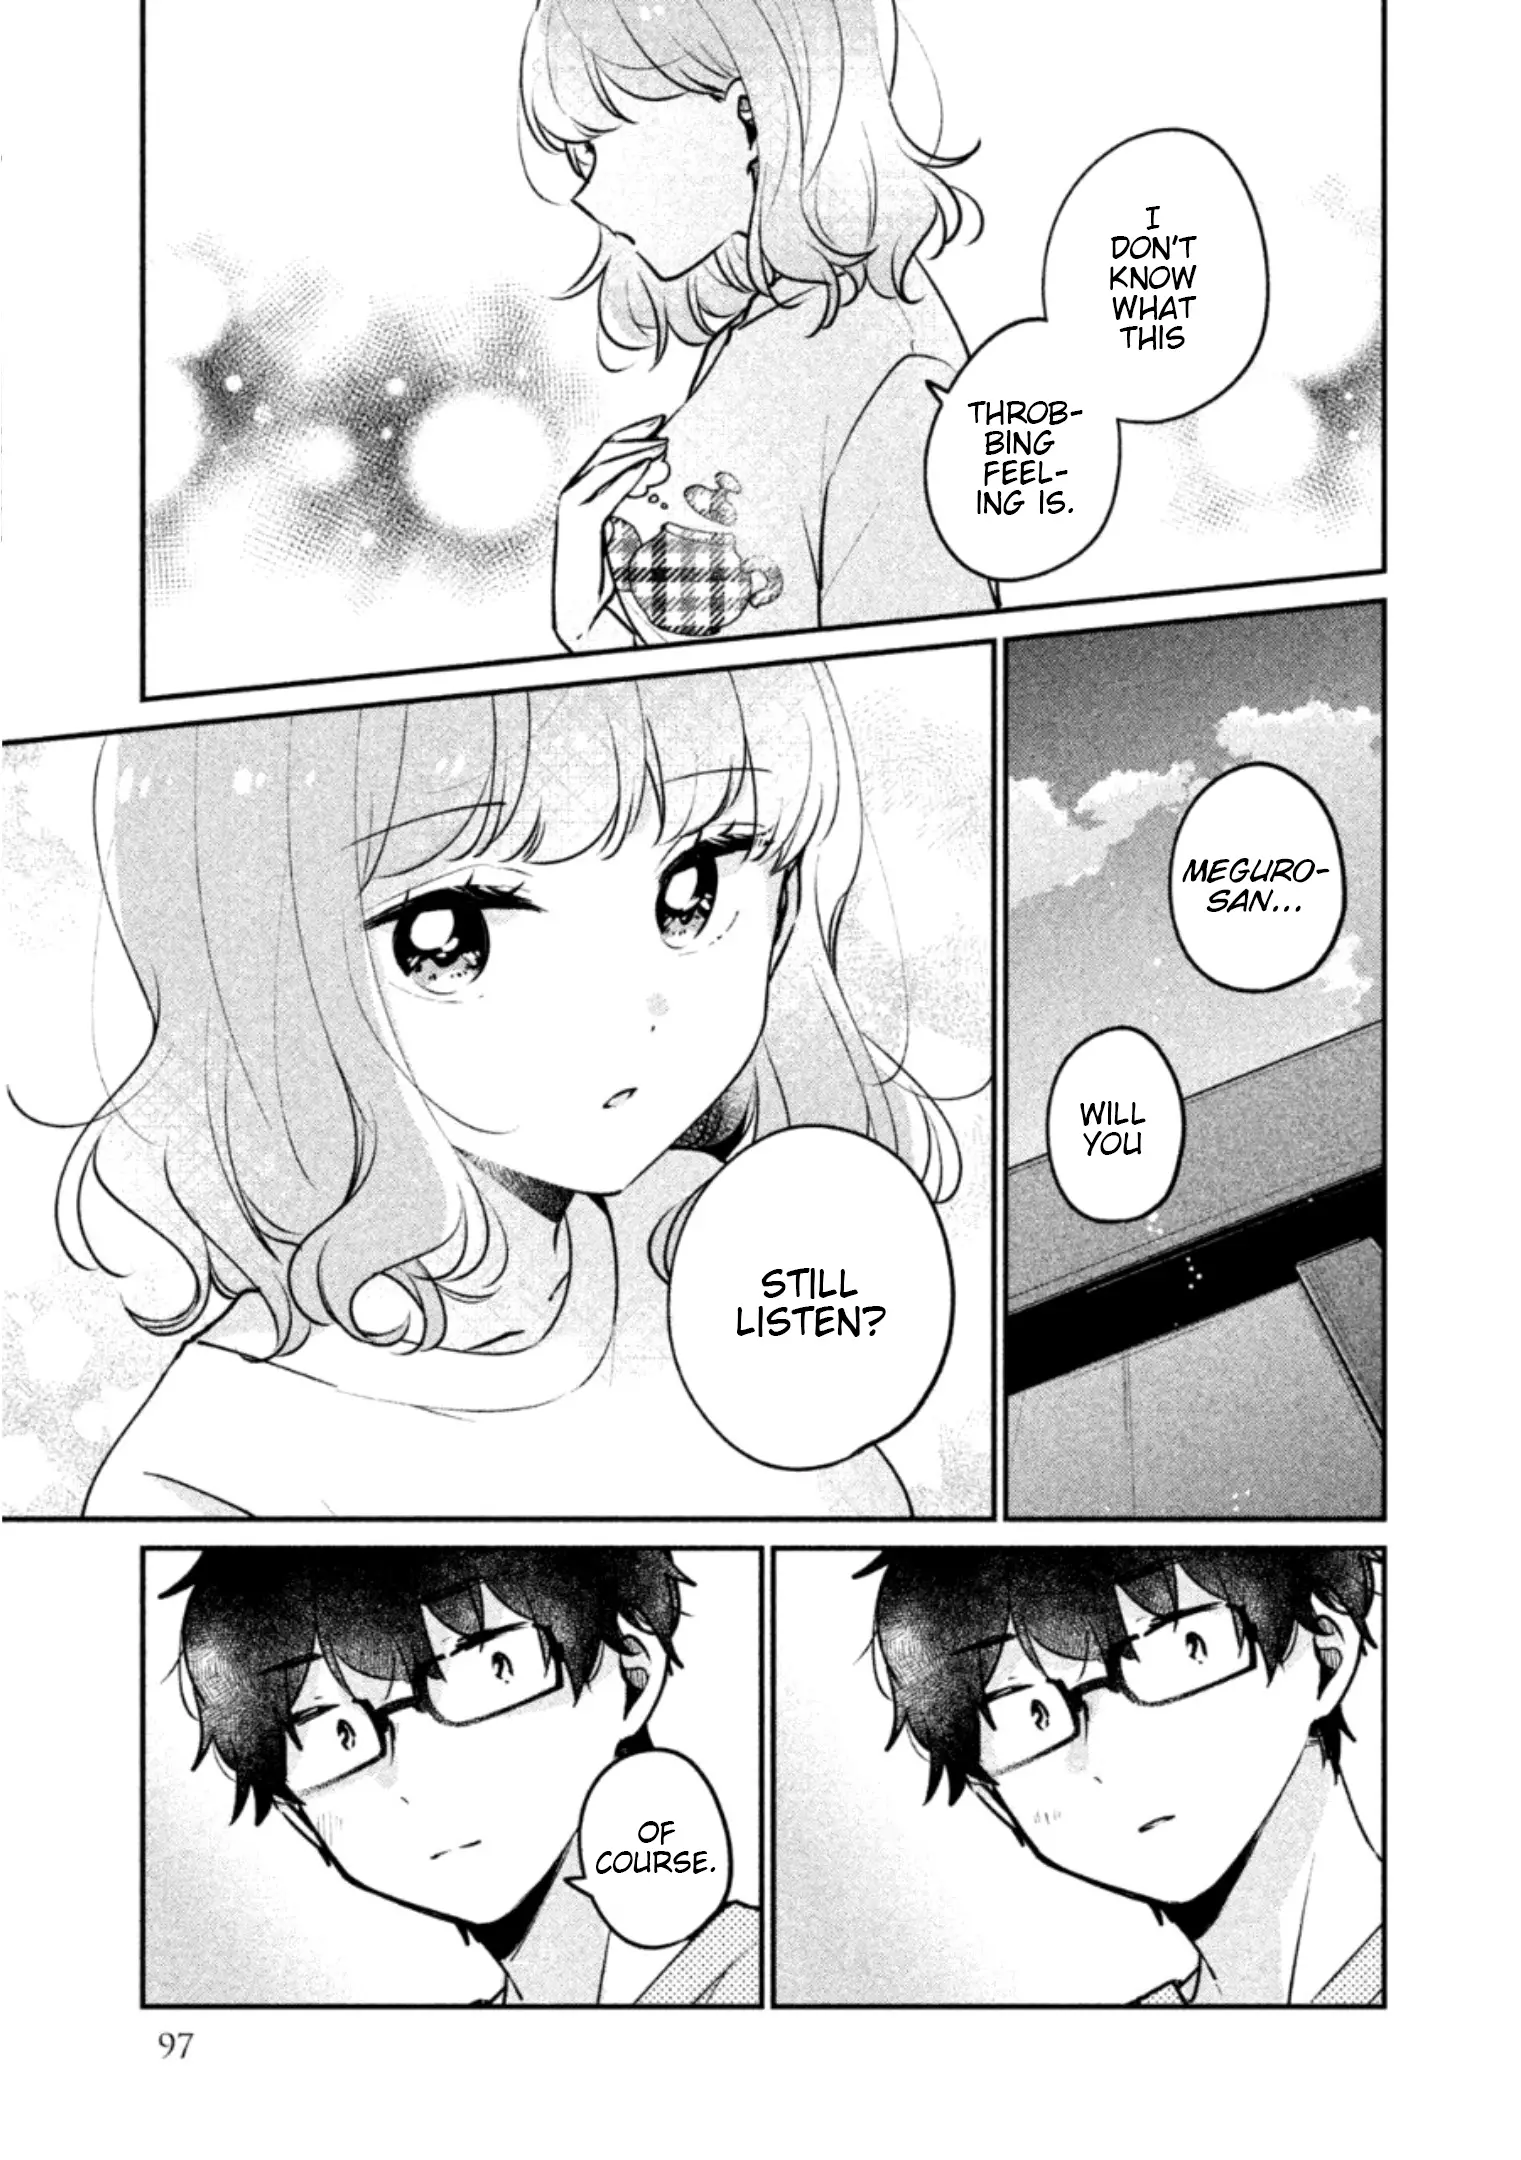 It's Not Meguro-San's First Time - 24 page 6